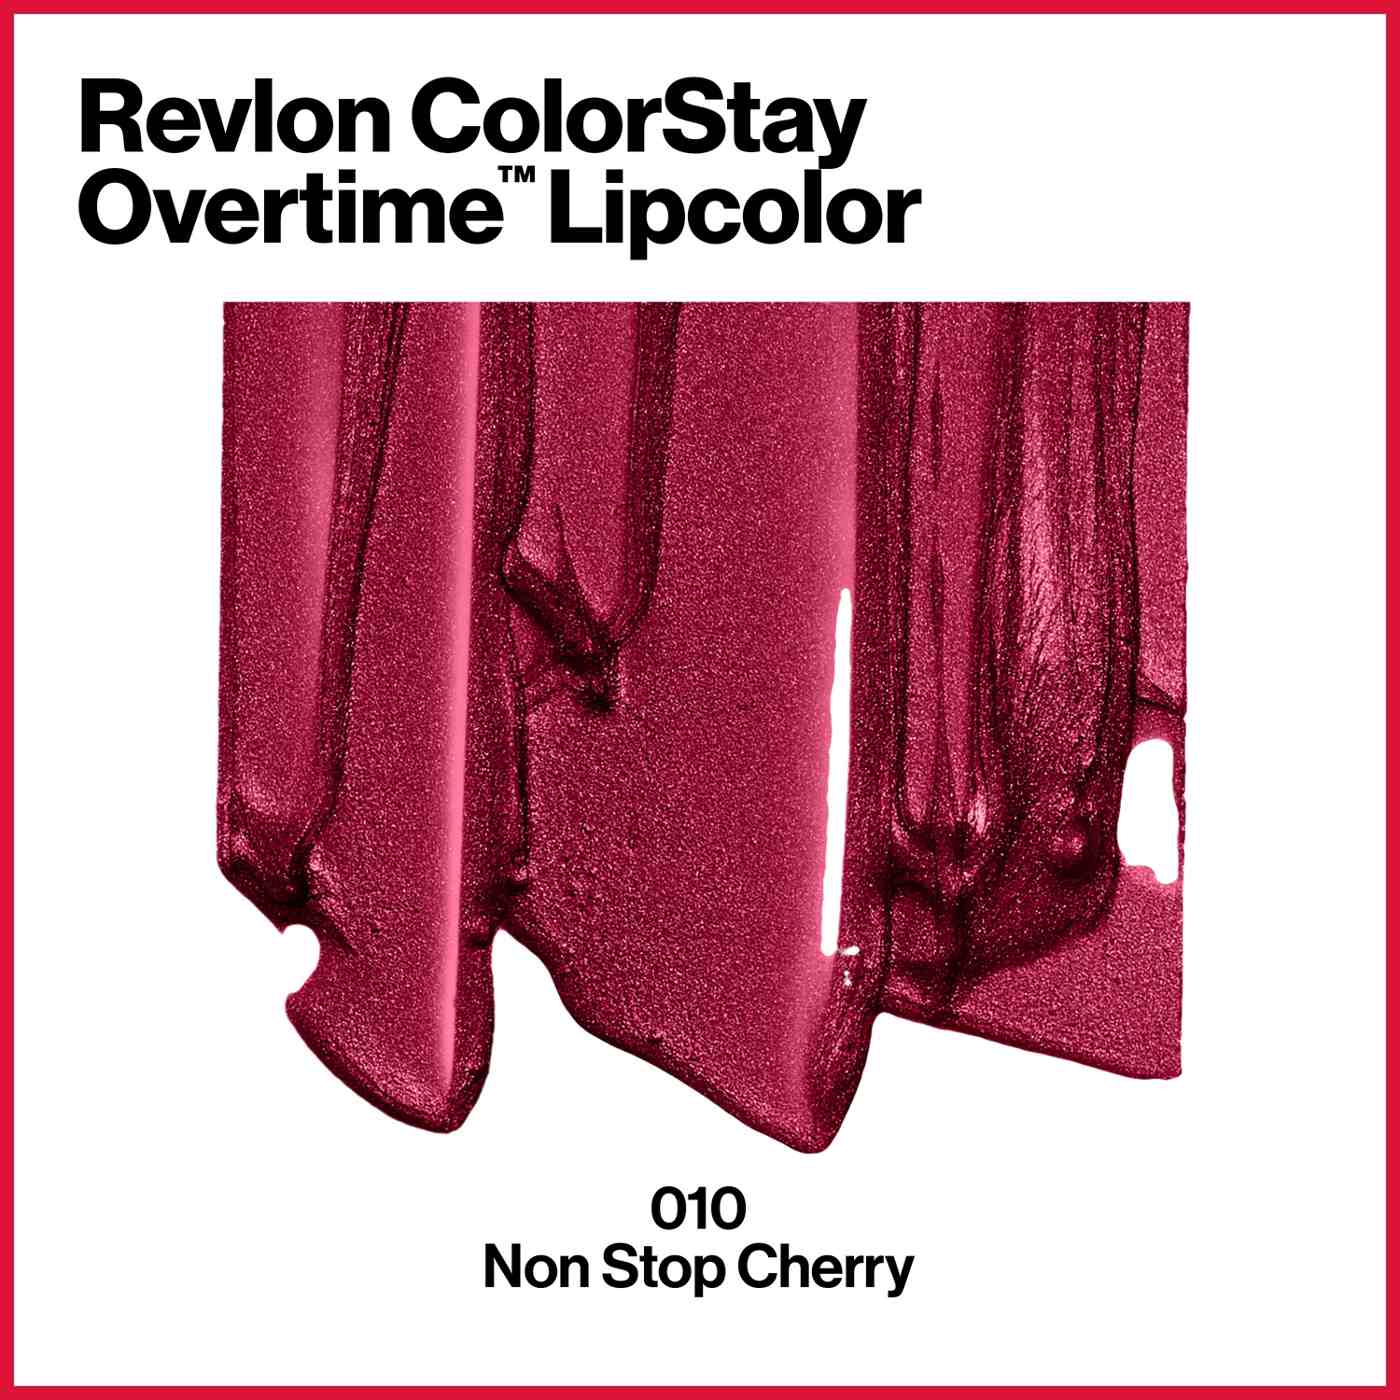 Revlon ColorStay Overtime Lipcolor - 010 Non-Stop Cherry; image 5 of 8